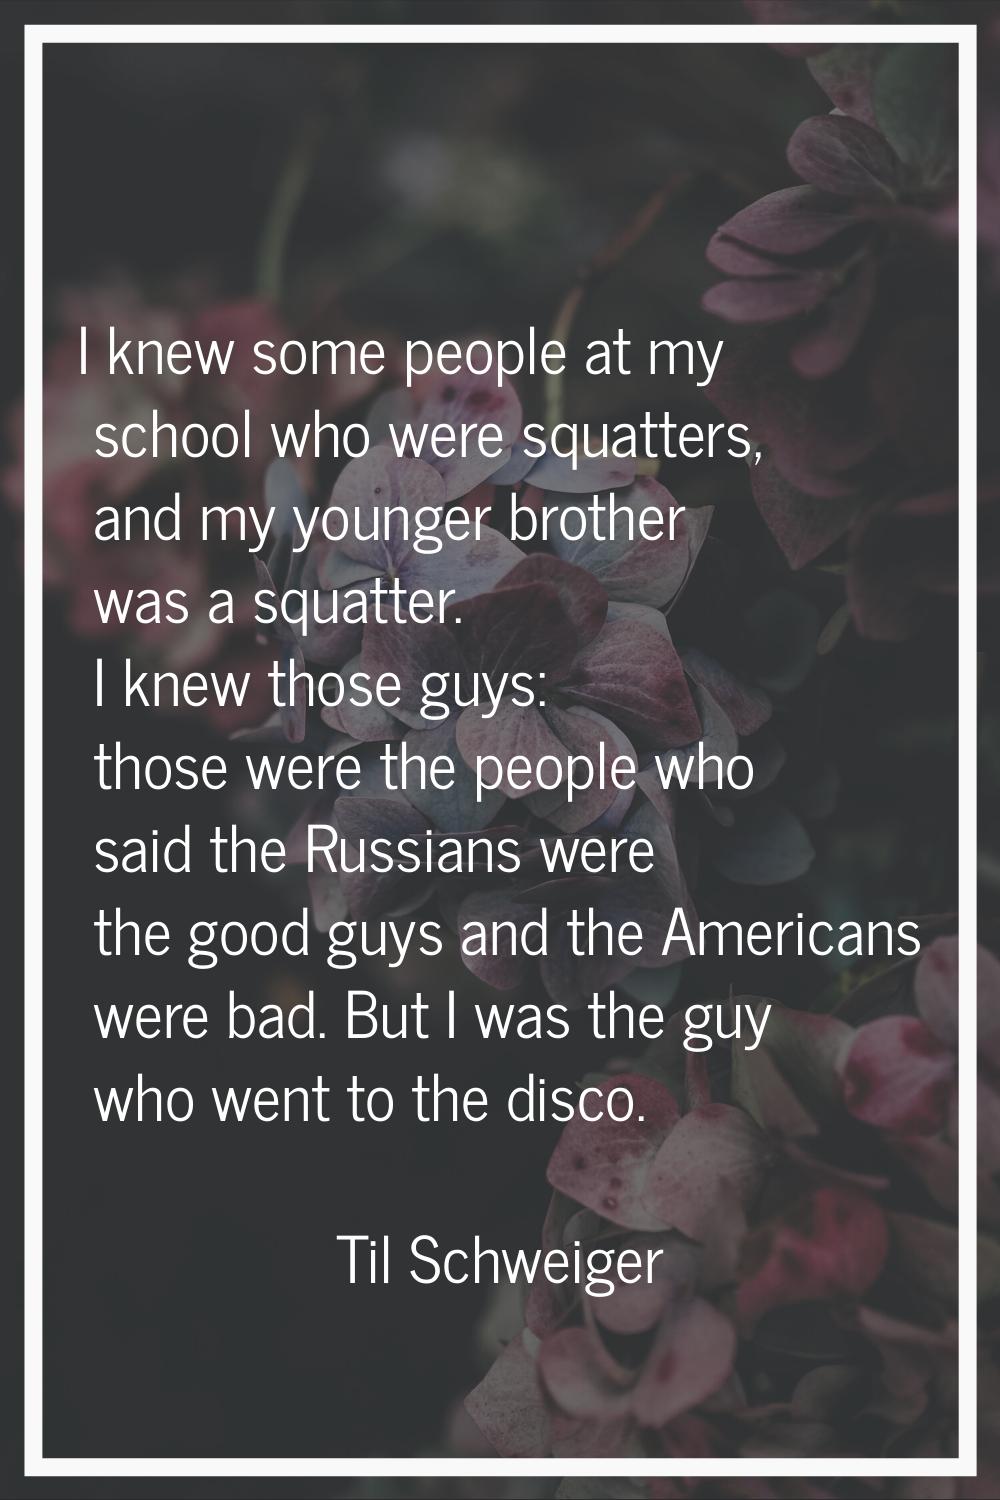 I knew some people at my school who were squatters, and my younger brother was a squatter. I knew t